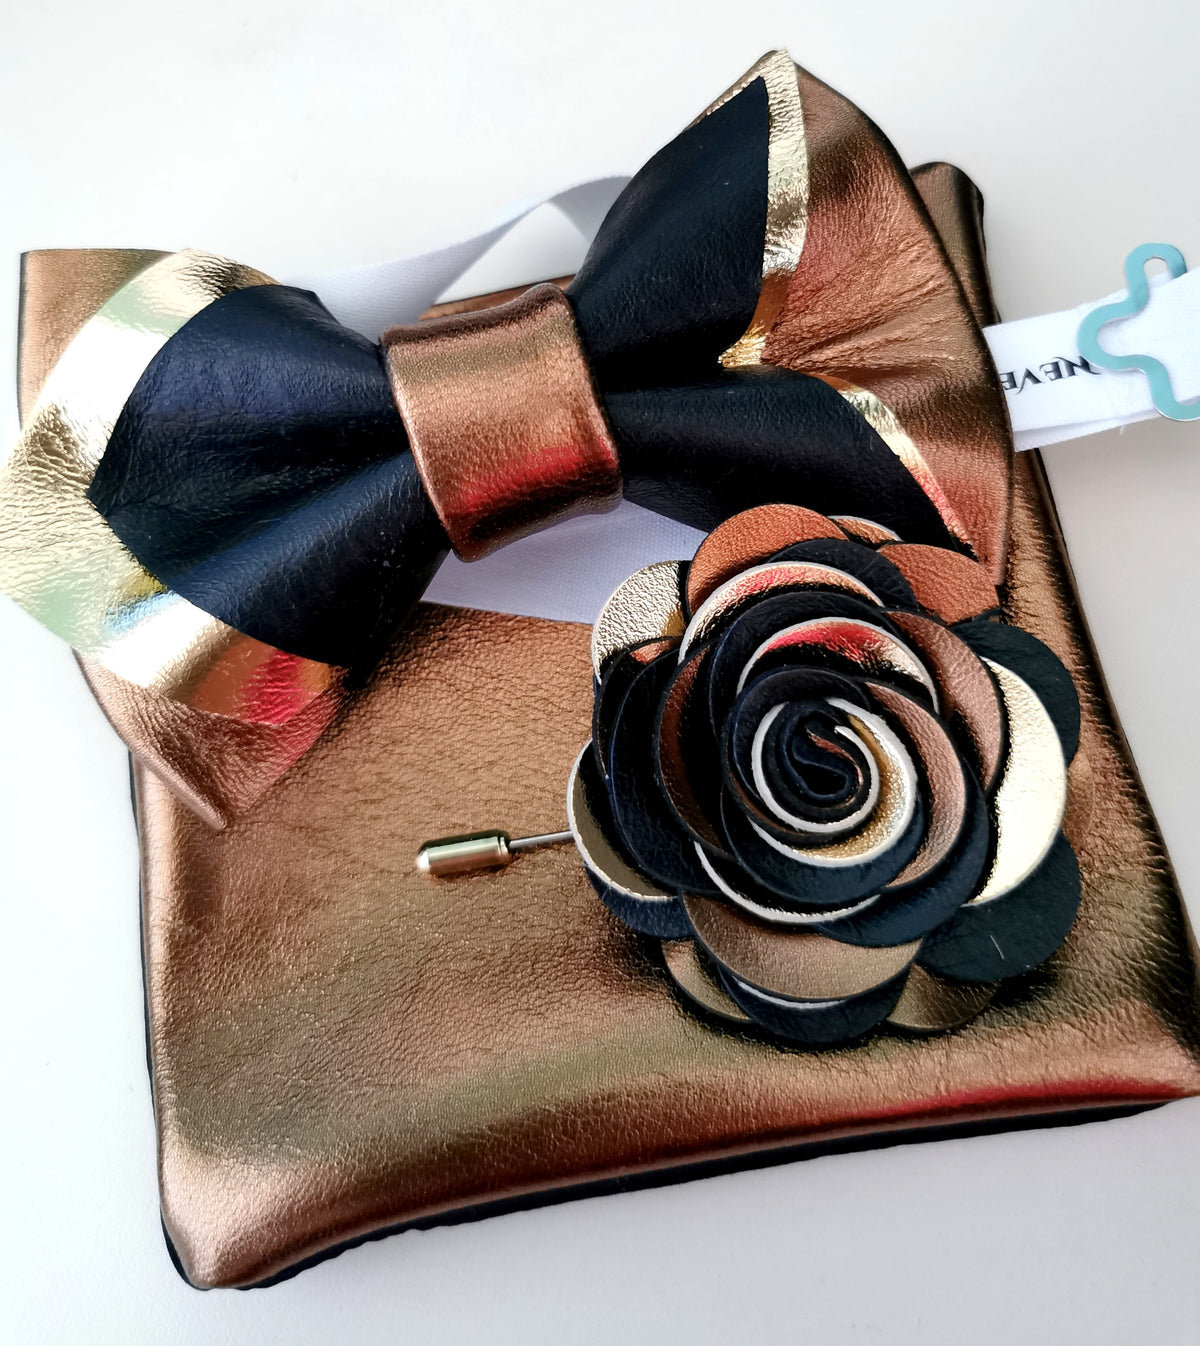 copper metallic bow tie, copper bow tie wedding set, copper black bow tie set, groomsmen bow tie set, copper boutonniere rose flower pin, copper bow tie and square set, boys prom suit bowtie 